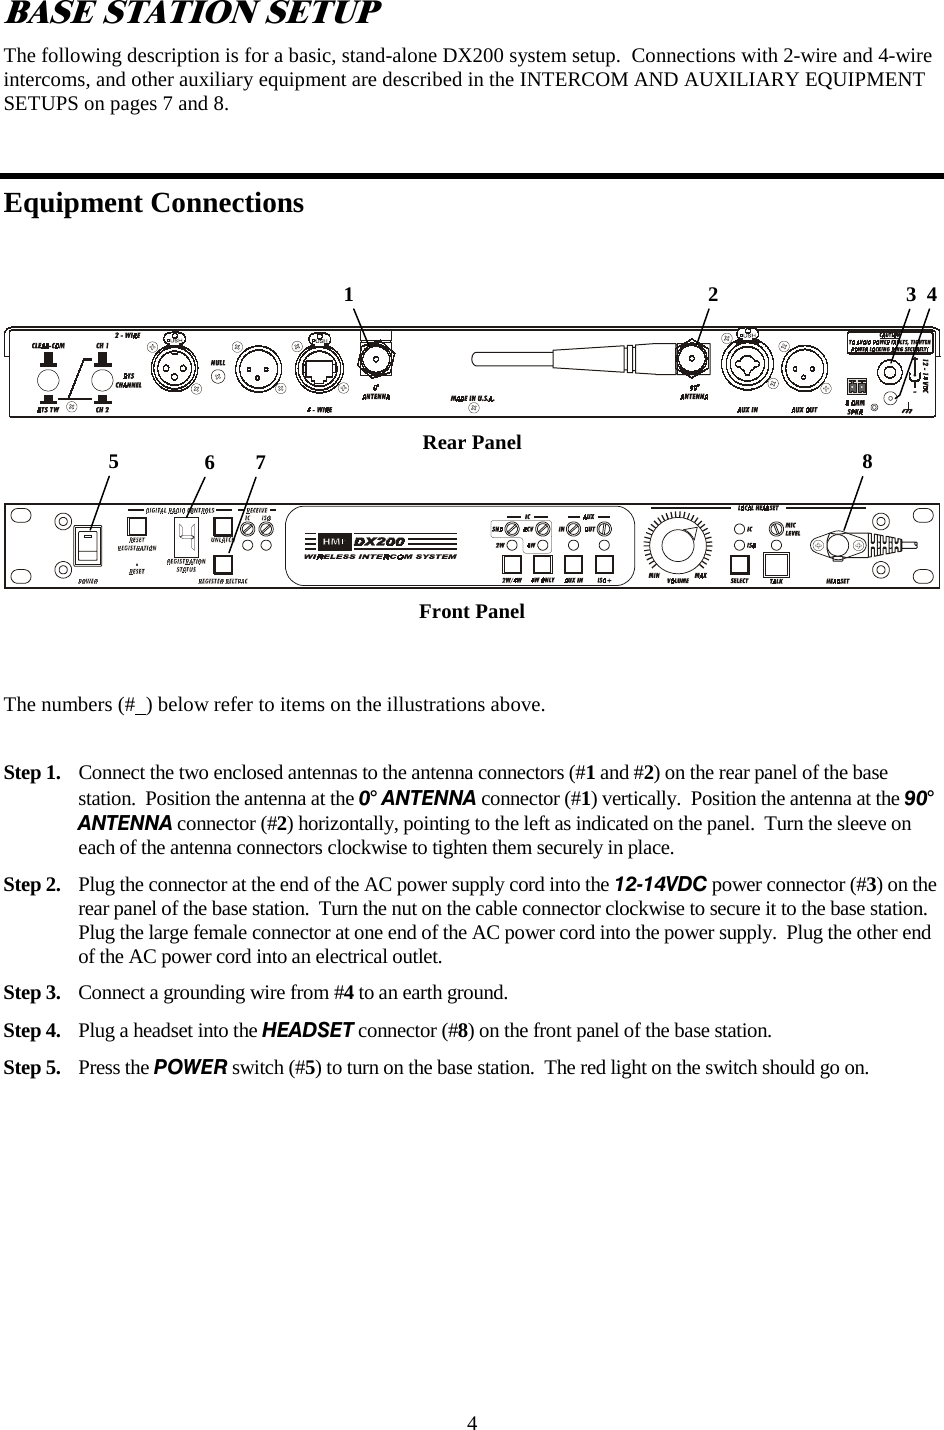 4 BASE STATION SETUP The following description is for a basic, stand-alone DX200 system setup.  Connections with 2-wire and 4-wire intercoms, and other auxiliary equipment are described in the INTERCOM AND AUXILIARY EQUIPMENT SETUPS on pages 7 and 8.  Equipment Connections  Rear Panel     Front Panel   The numbers (#  ) below refer to items on the illustrations above.  Step 1.  Connect the two enclosed antennas to the antenna connectors (#1 and #2) on the rear panel of the base station.  Position the antenna at the 0° ANTENNA connector (#1) vertically.  Position the antenna at the 90° ANTENNA connector (#2) horizontally, pointing to the left as indicated on the panel.  Turn the sleeve on each of the antenna connectors clockwise to tighten them securely in place.  Step 2.  Plug the connector at the end of the AC power supply cord into the 12-14VDC power connector (#3) on the rear panel of the base station.  Turn the nut on the cable connector clockwise to secure it to the base station.  Plug the large female connector at one end of the AC power cord into the power supply.  Plug the other end of the AC power cord into an electrical outlet. Step 3.  Connect a grounding wire from #4 to an earth ground.  Step 4.  Plug a headset into the HEADSET connector (#8) on the front panel of the base station. Step 5.  Press the POWER switch (#5) to turn on the base station.  The red light on the switch should go on.     1                                                                    2                                    3  4 8 5  6  7 